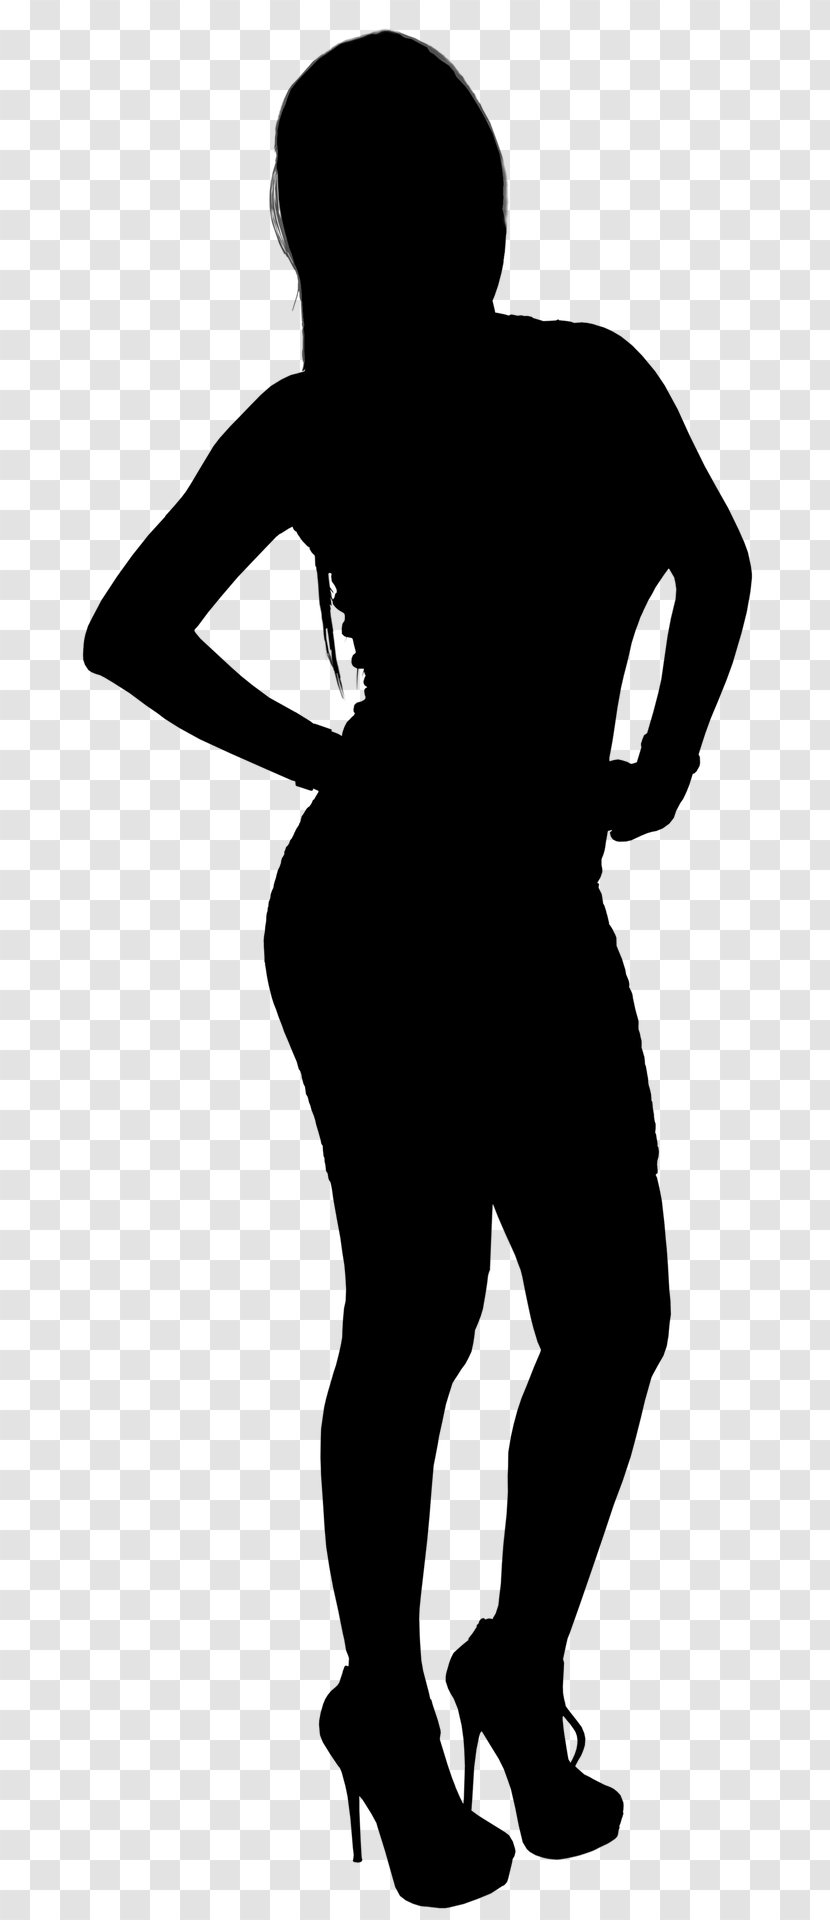 Vector Graphics Clip Art Silhouette Image - Blackandwhite - Drawing Transparent PNG